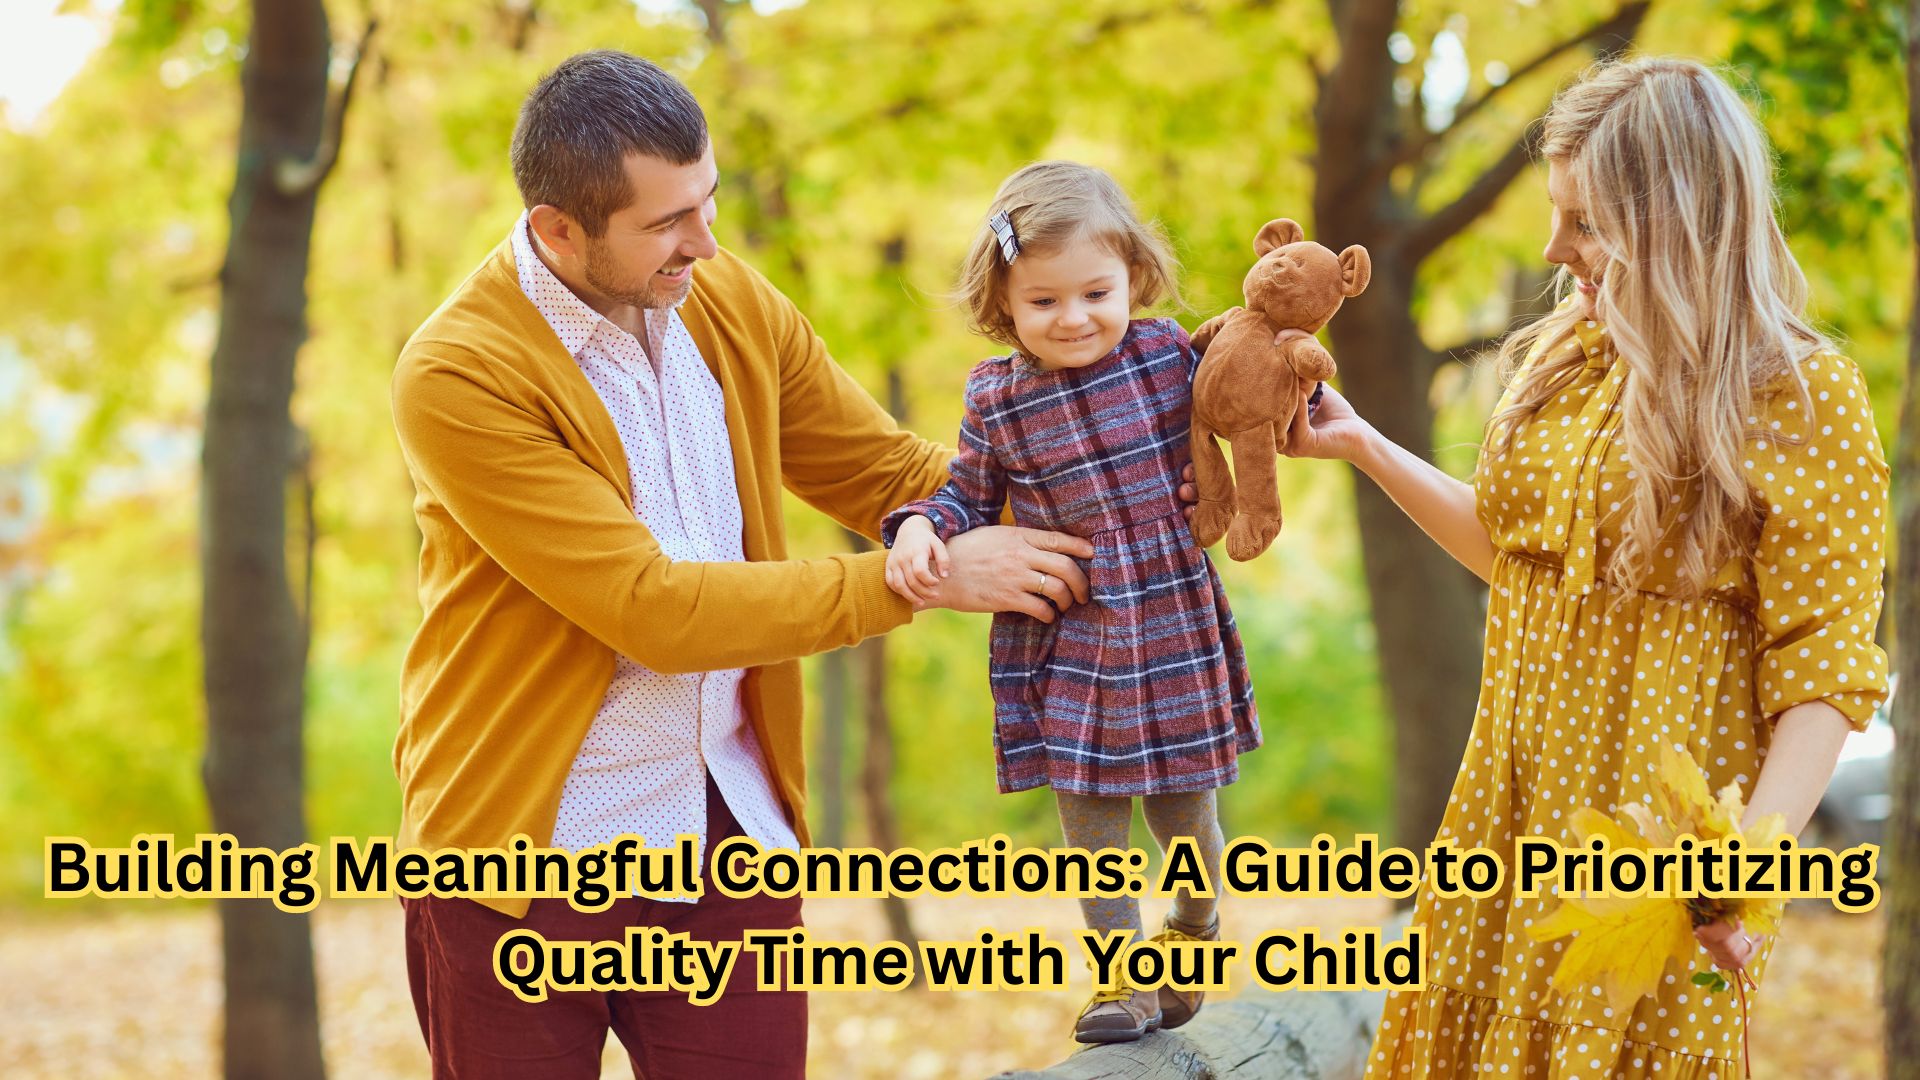 Building Meaningful Connections: A Guide to Prioritizing Quality Time with Your Child